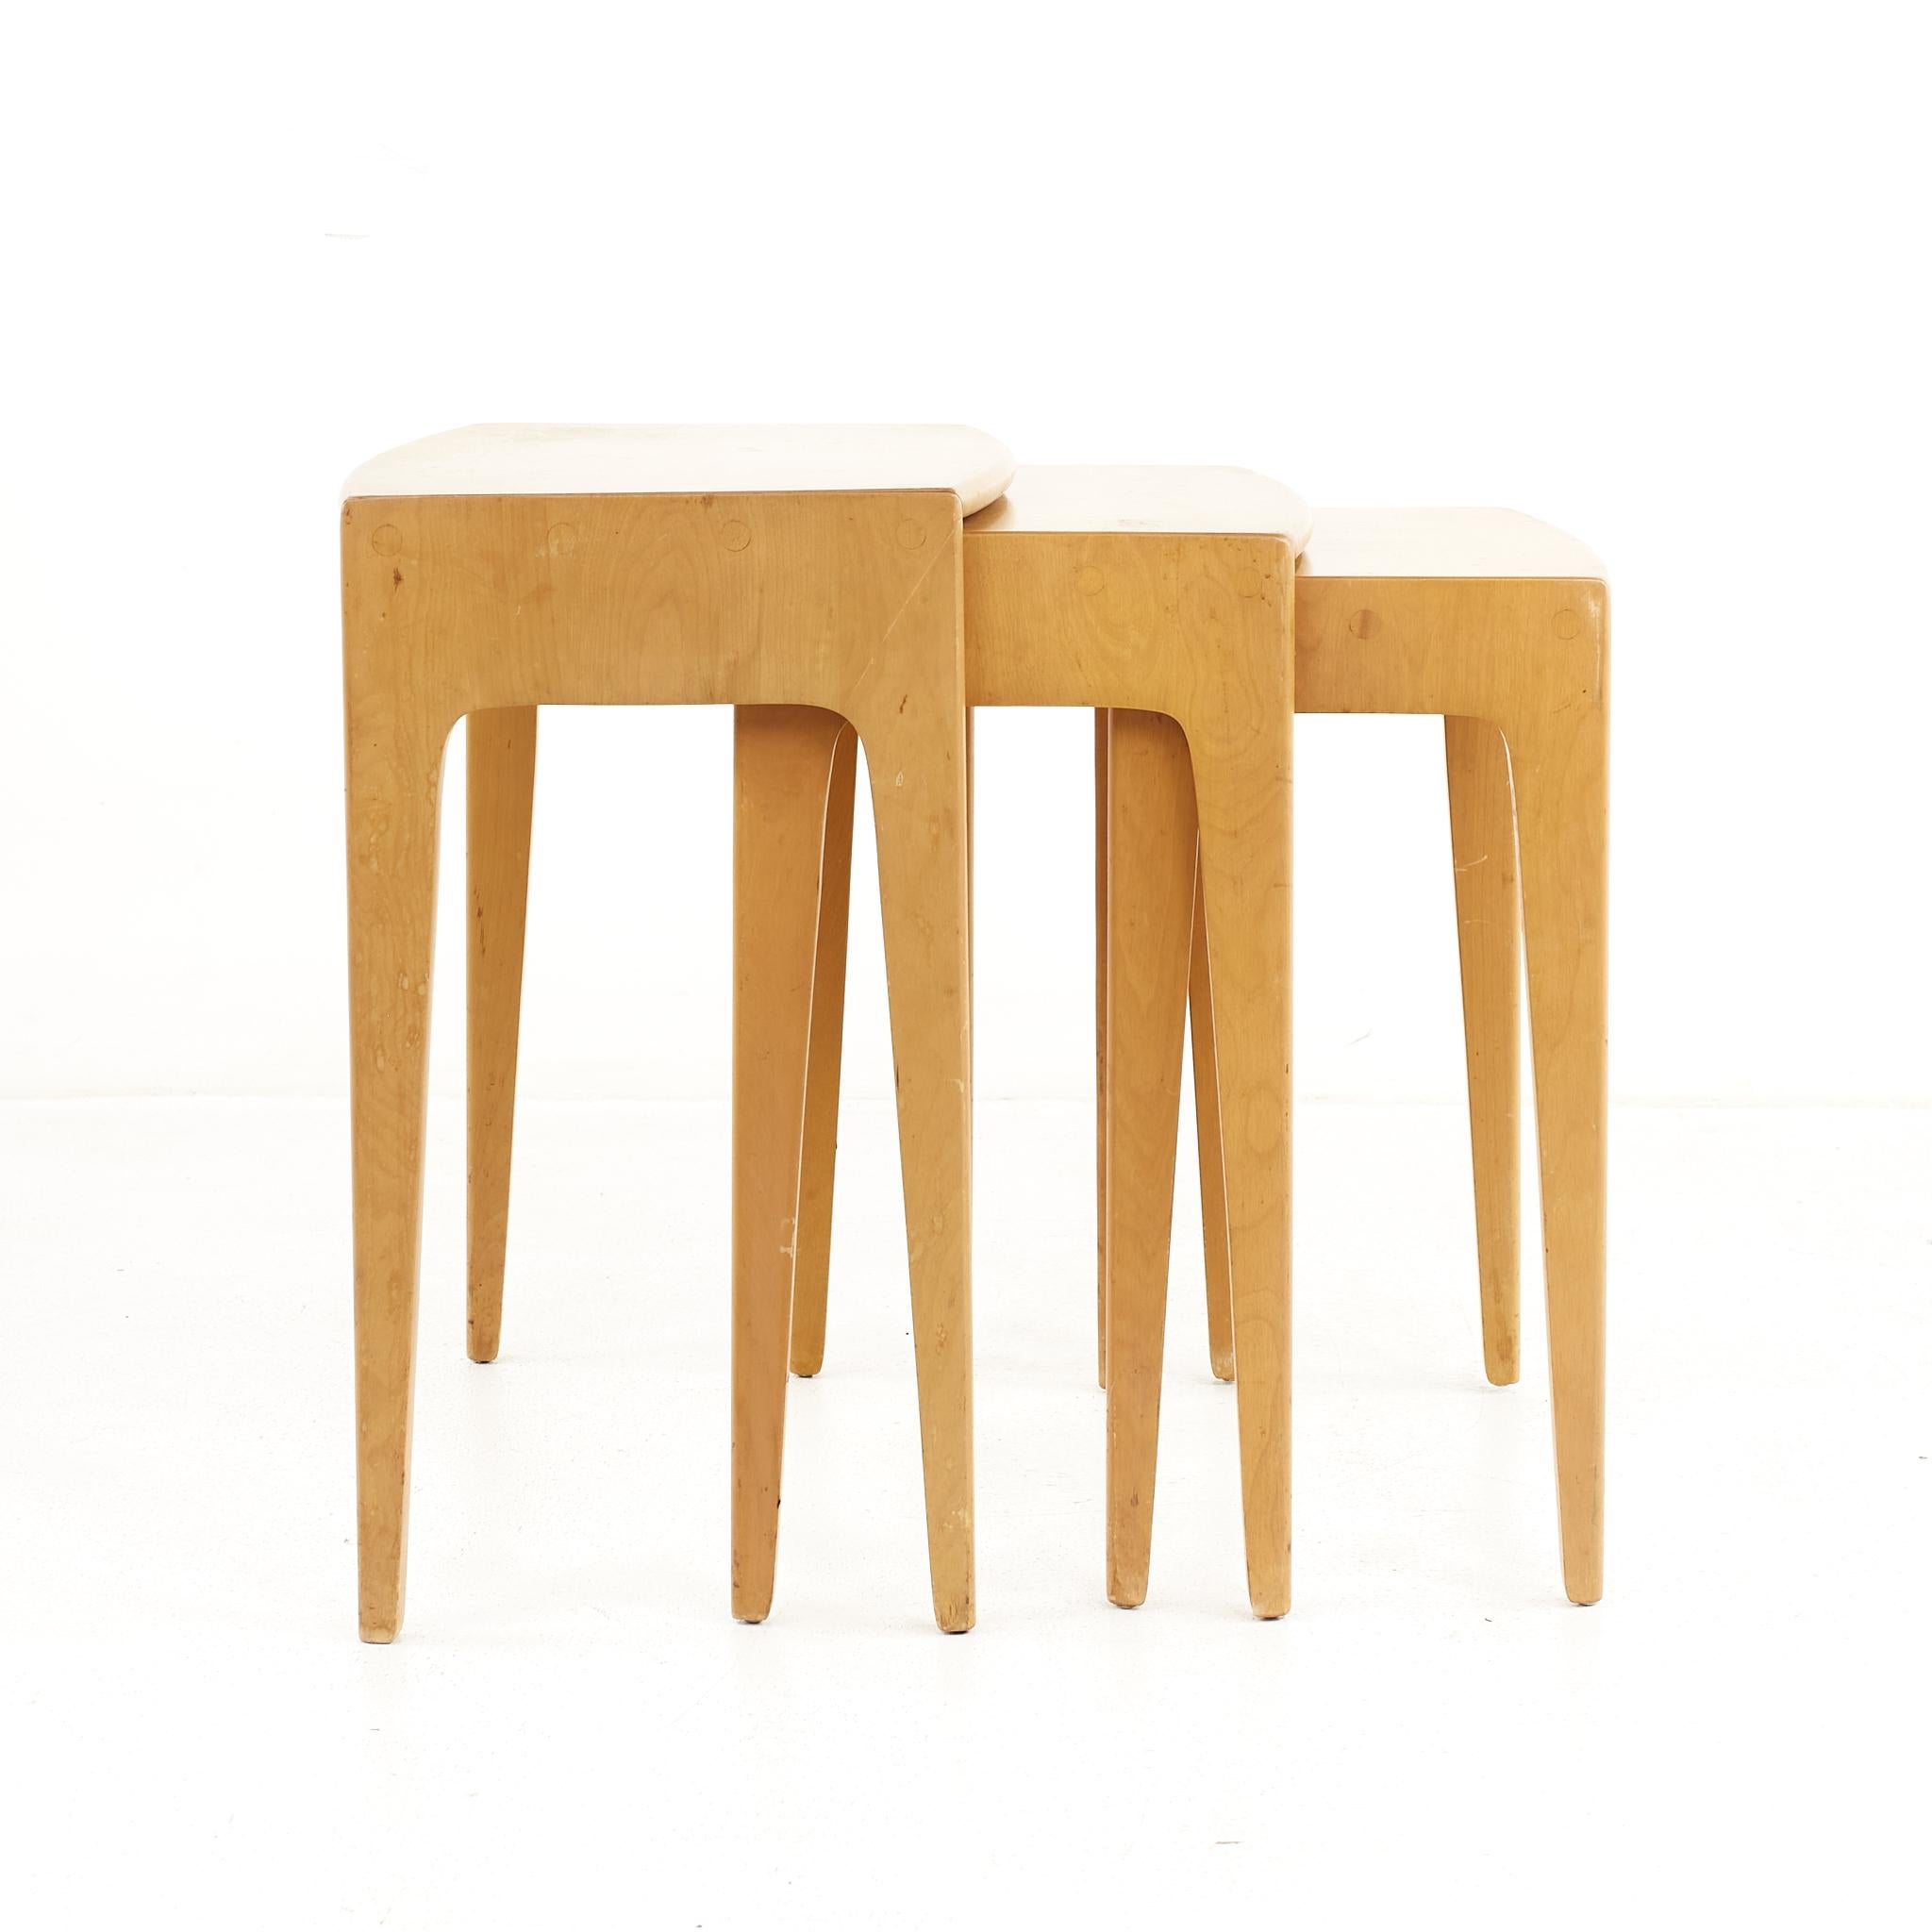 Heywood Wakefield Mid Century Maple Wheat Nesting Tables - Set of 3 For Sale 4